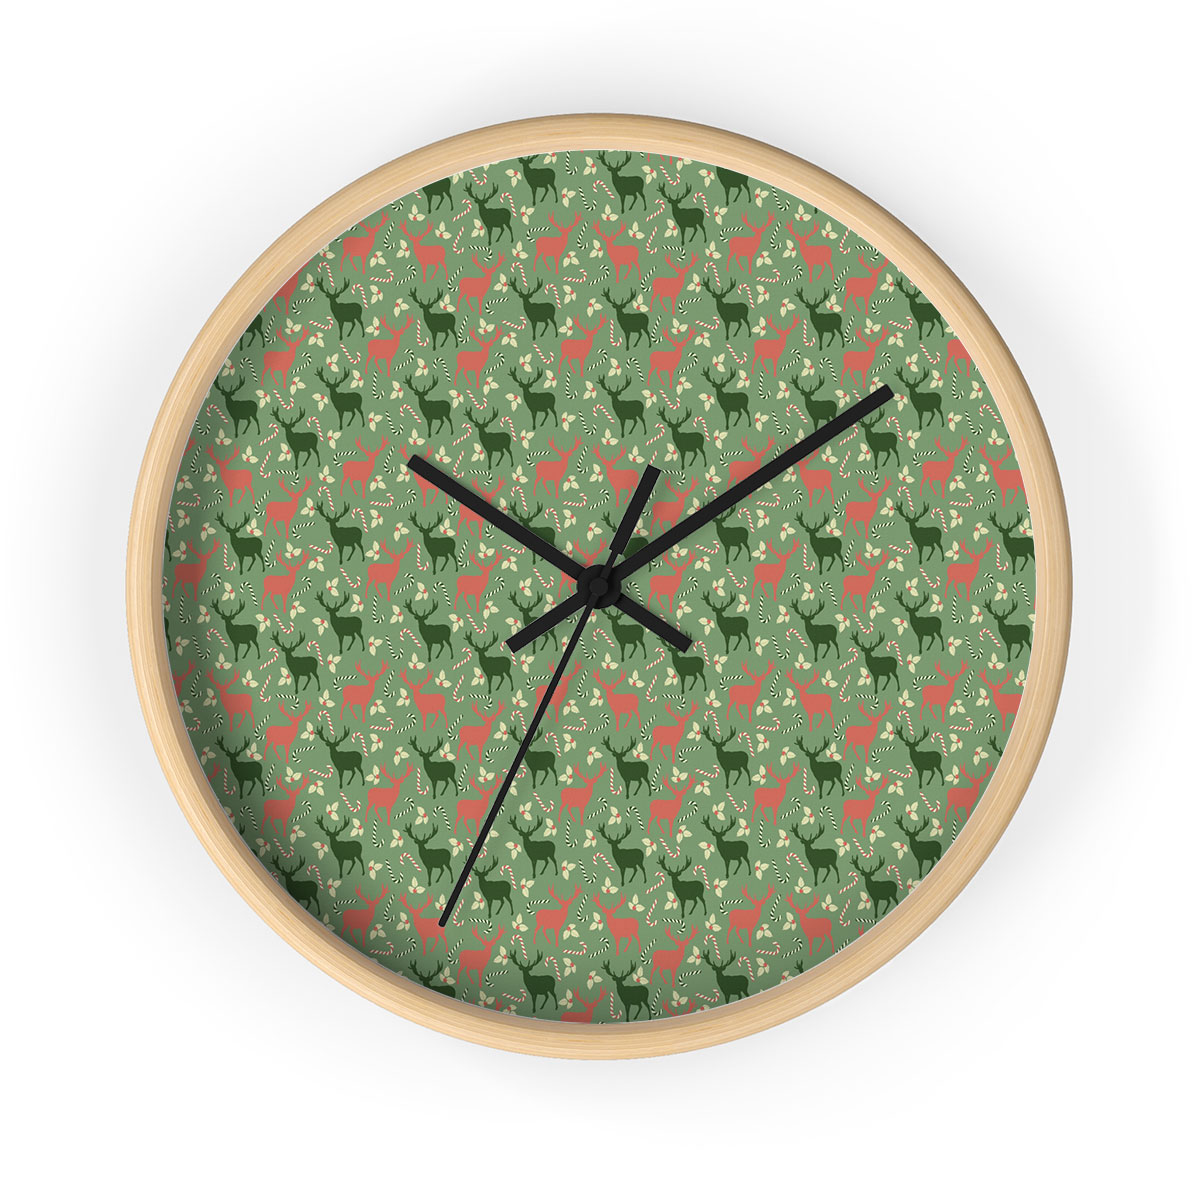 Reindeer, Christmas Flowers And Candy Canes Printed Wooden Wall Clock